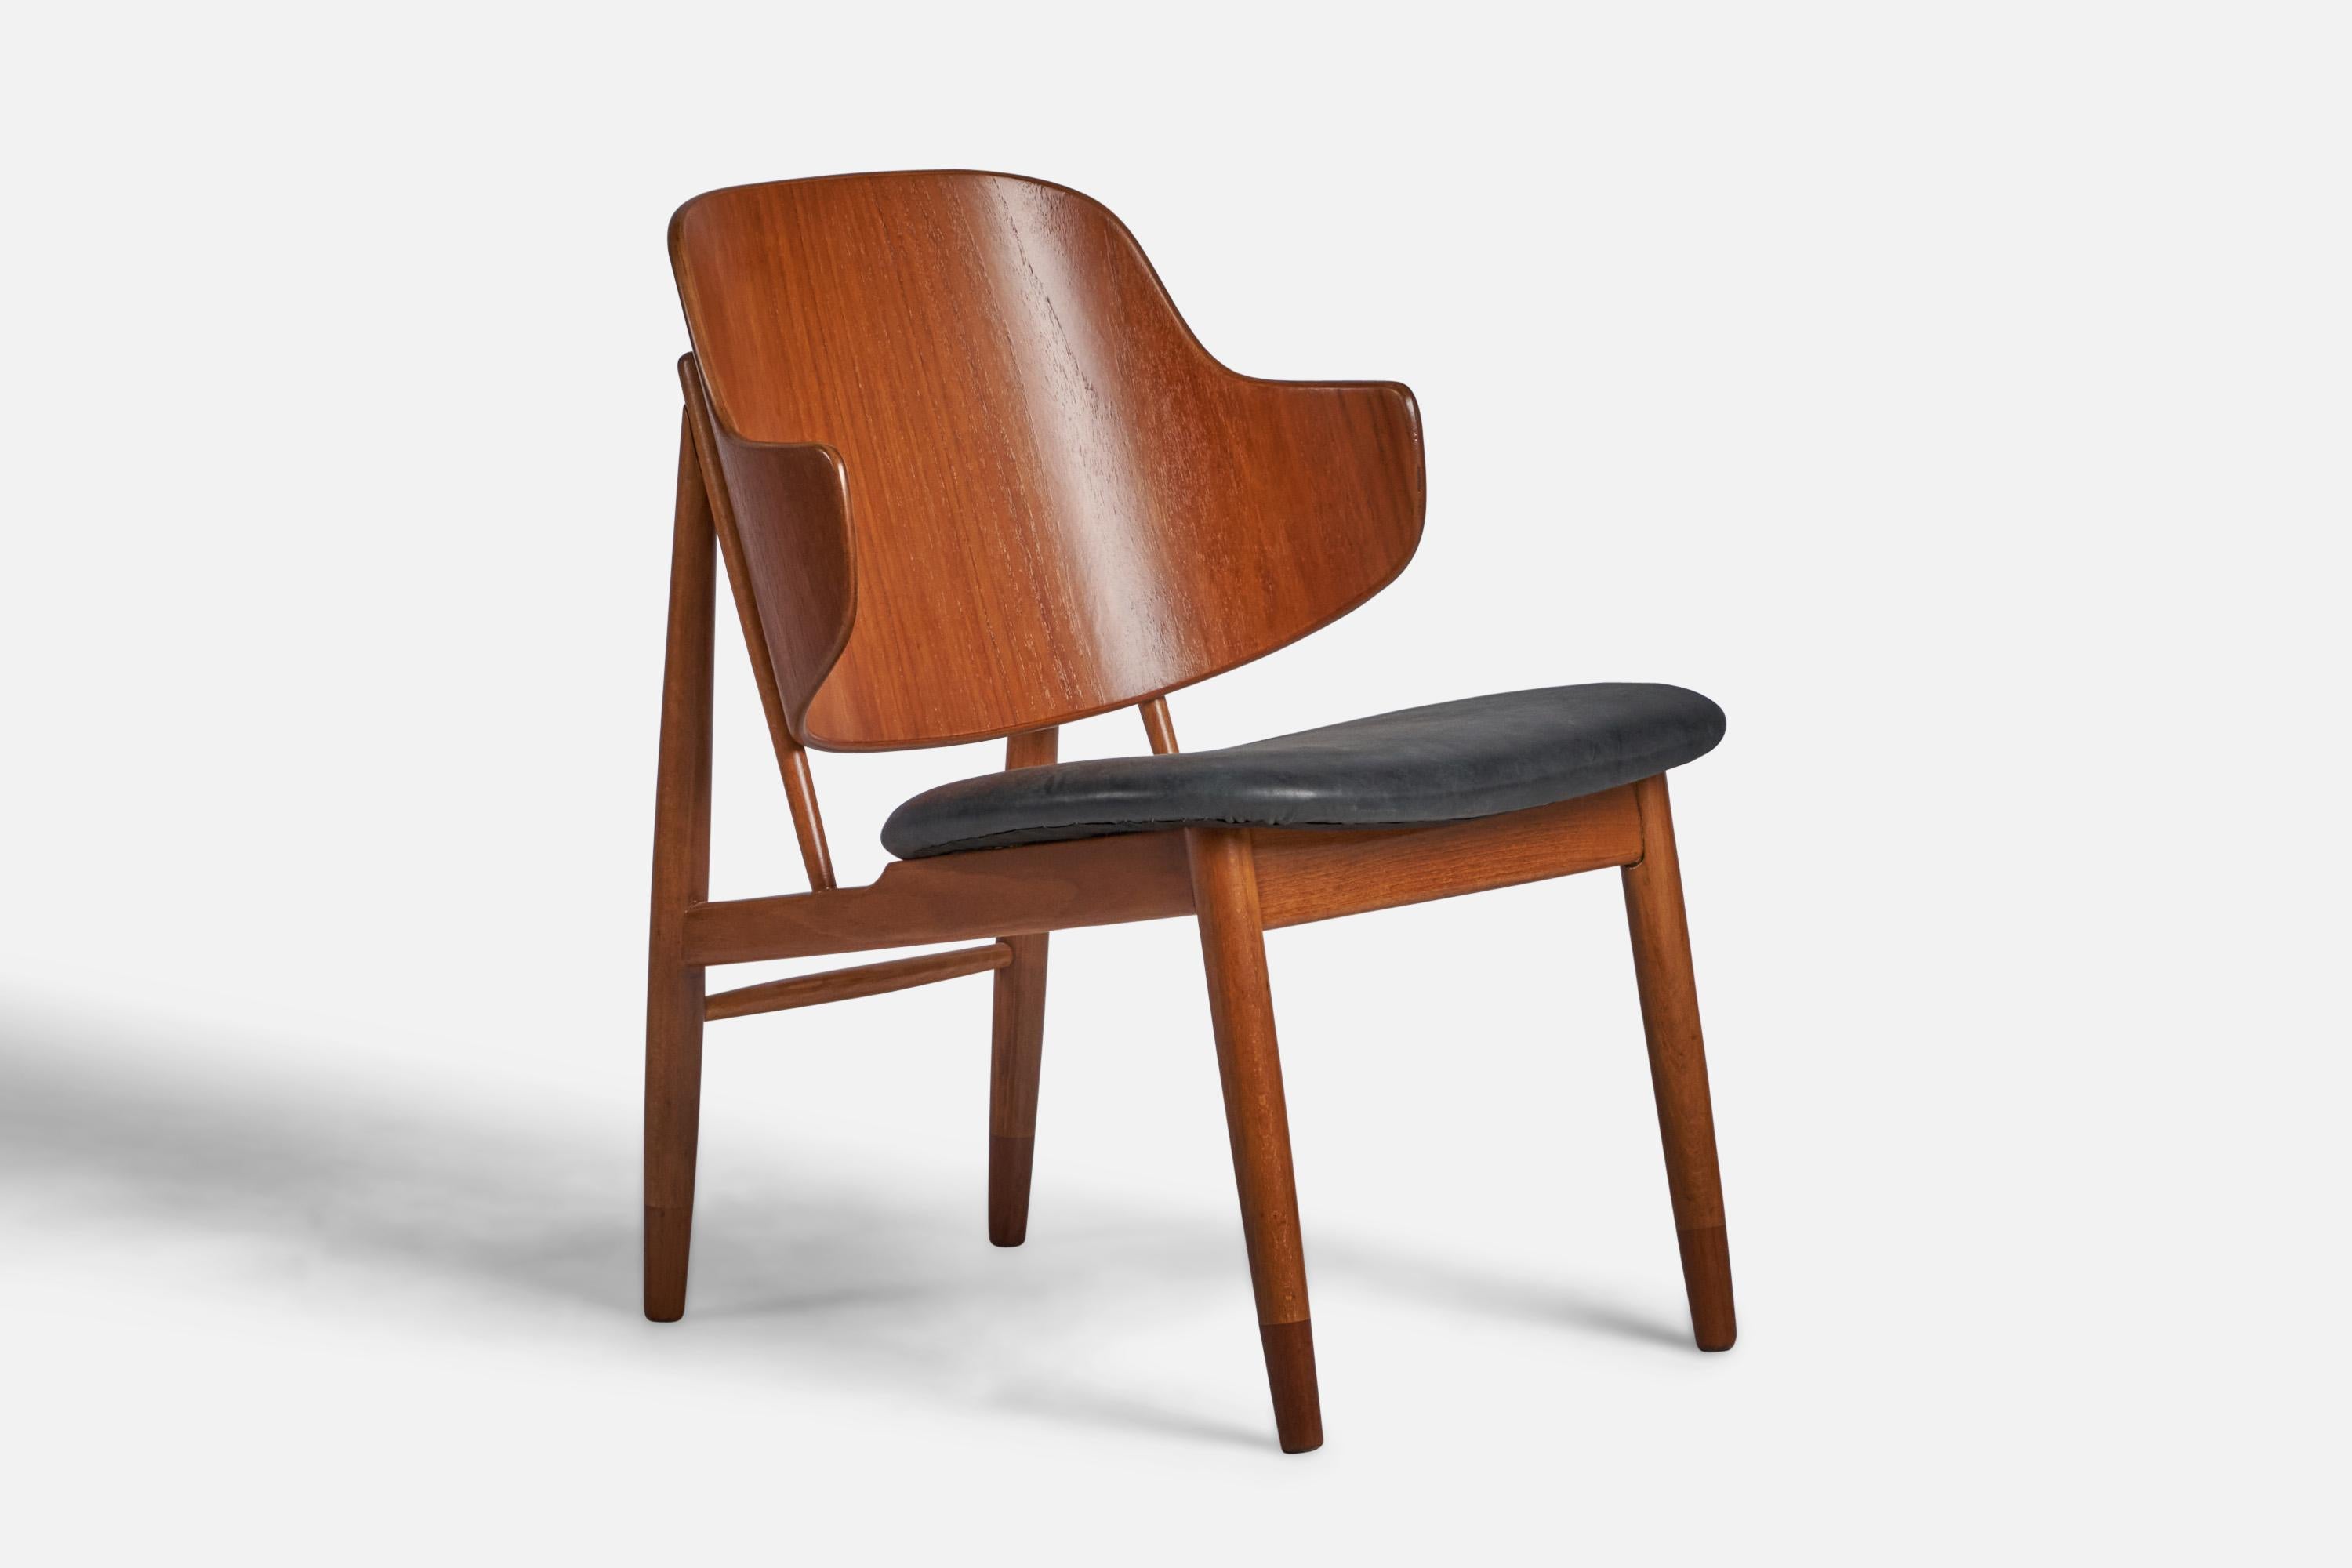 A teak, beech and black leather lounge chair designed by Ib Kofod-Larsen and produced by Christensen & Larsen, Denmark, 1950s.
Seat height: 16.5”